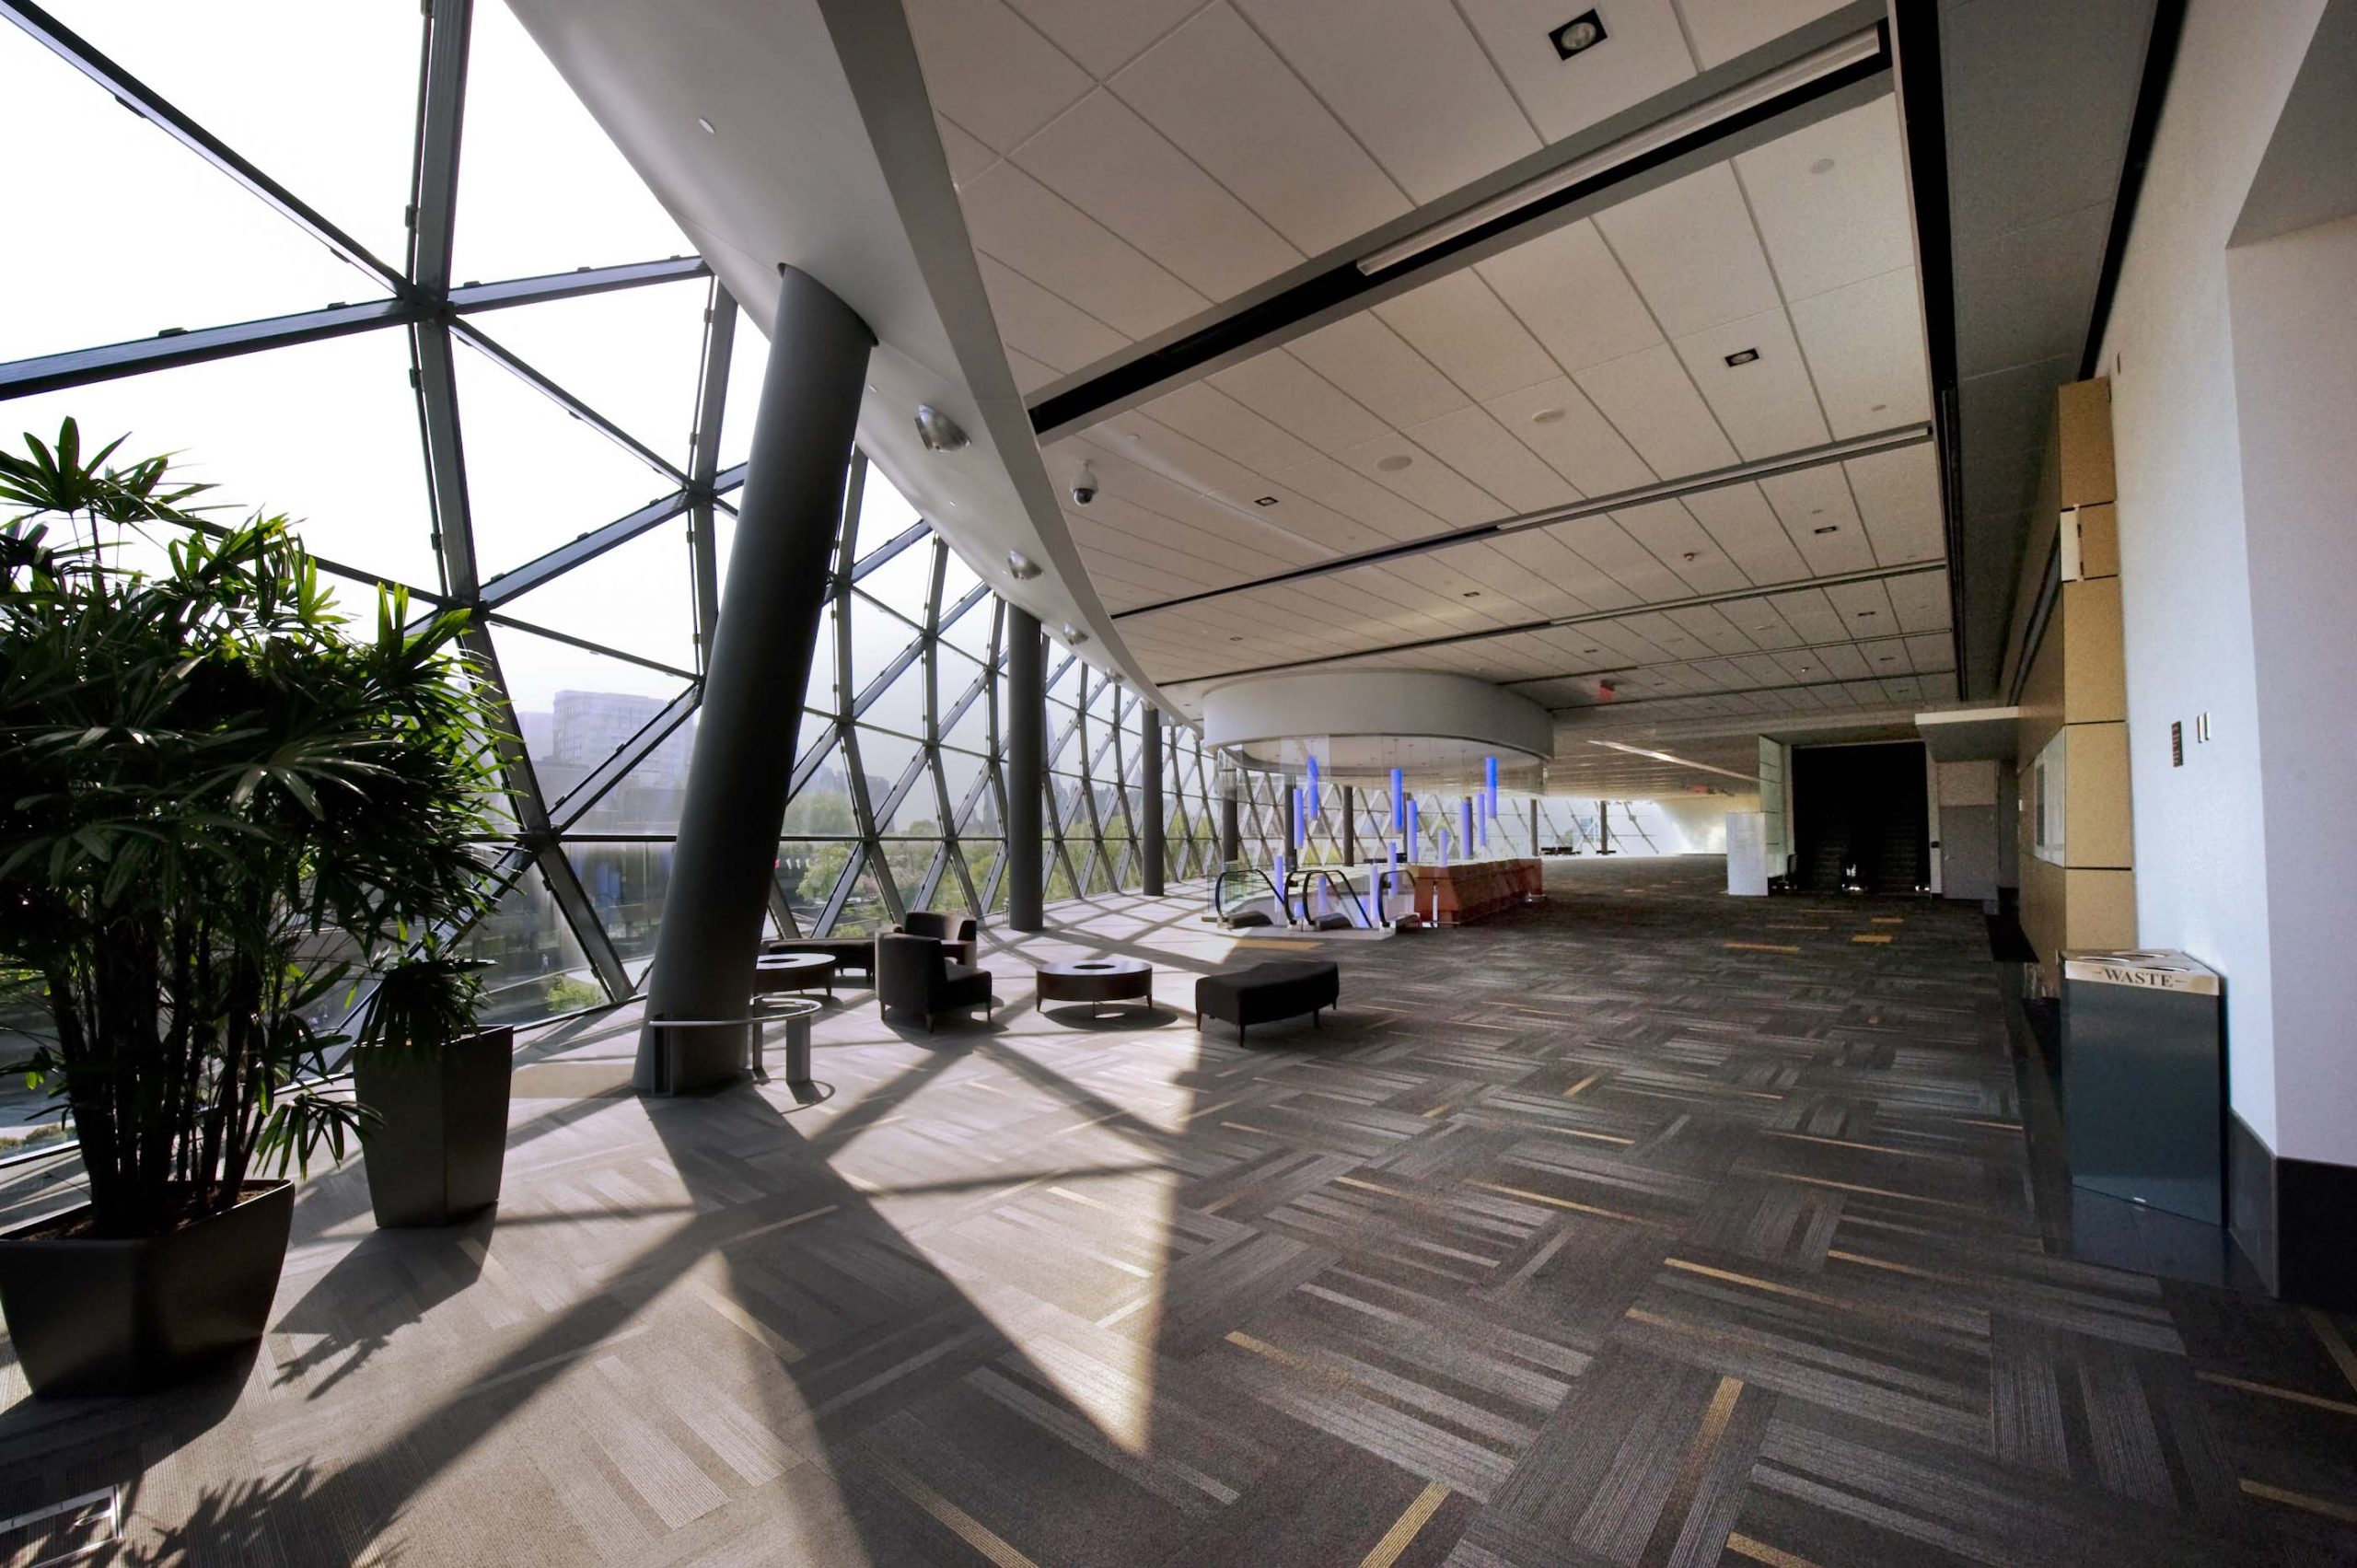 The Shaw Centre's Parliament Foyer on Level 3.